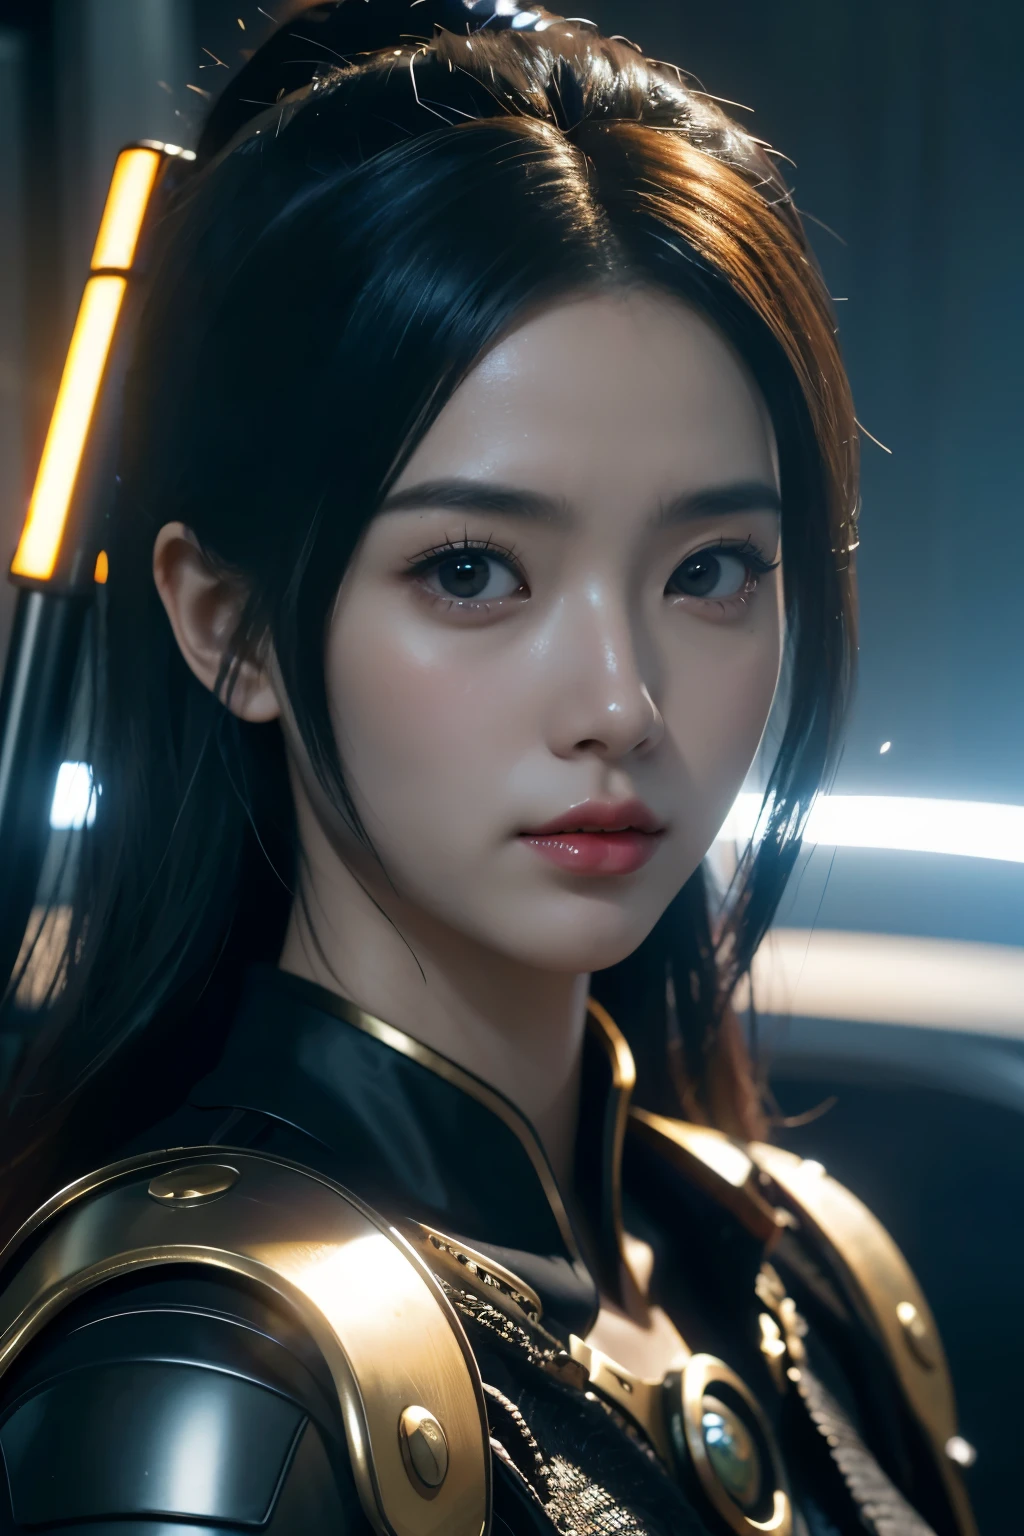 Game art，The best picture quality，Highest resolution，8K，((A bust photograph))，((Portrait))，(Rule of thirds)，Unreal Engine 5 rendering works， (The Girl of the Future)，(Female Warrior)， 22-year-old girl，(Female hackers)，(Ancient Oriental hairstyle)，(A beautiful eye full of detail)，(Big breasts)，(Eye shadow)，Elegant and charming，indifferent，((Frown))，(Future style silk combat suit combined with the characteristics of Chinese cheongsam，Joint Armor，There are exquisite Chinese patterns on the clothes，A flash of jewellery)，Cyberpunk Characters，Future Style， Photo poses，City background，Movie lights，Ray tracing，Game CG，((3D Unreal Engine))，oc rendering reflection pattern